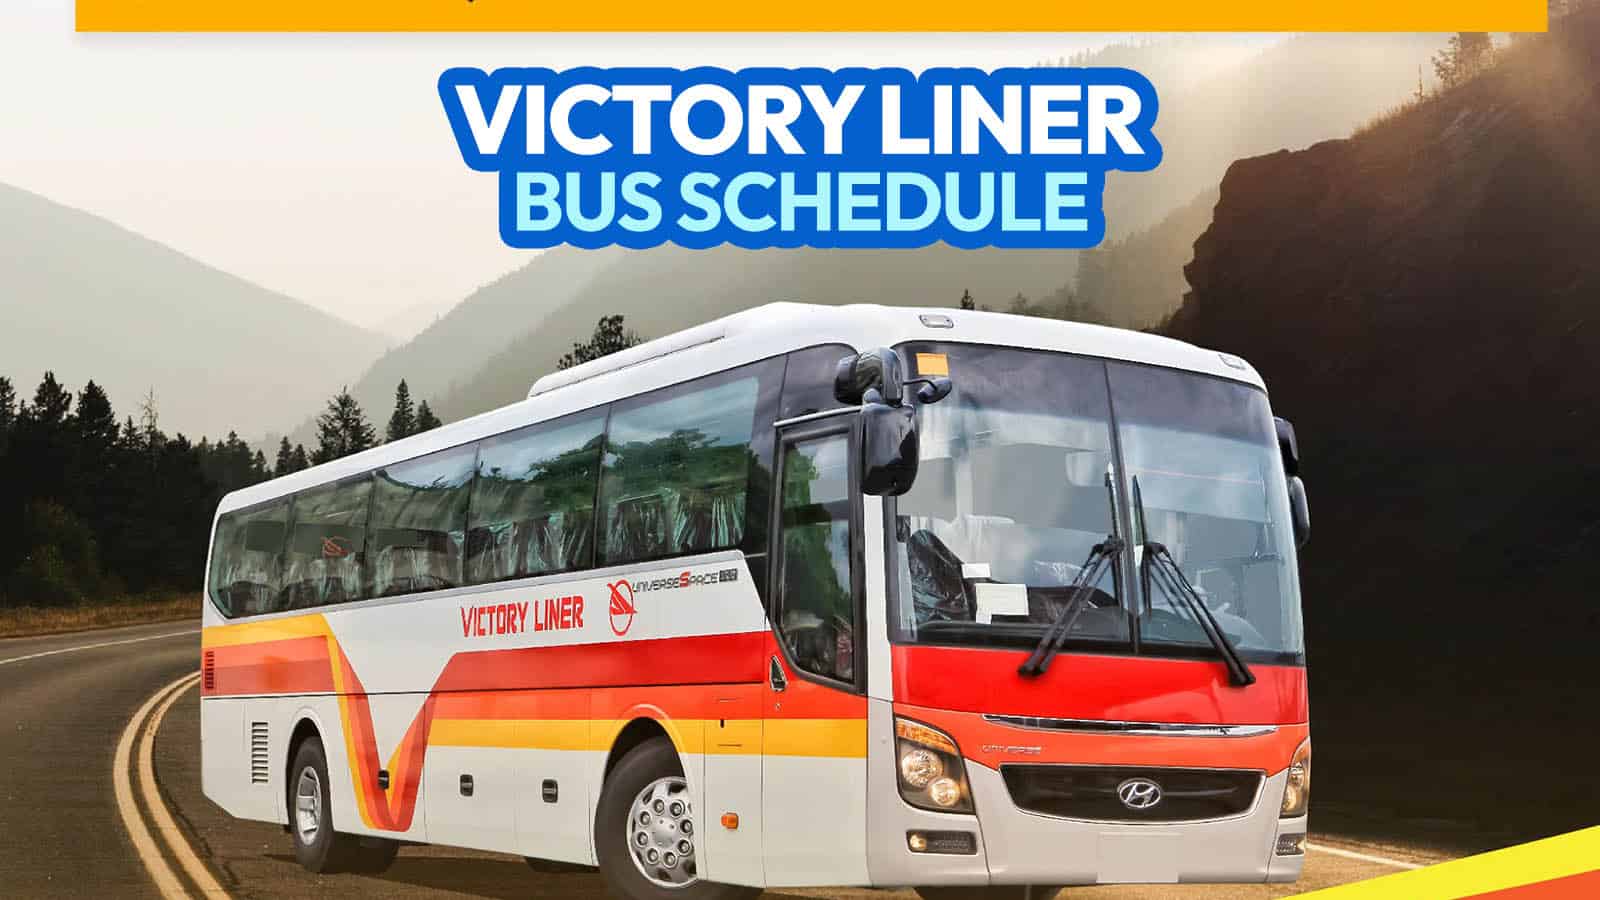 2022 VICTORY LINER Bus Schedules for Manila, Baguio, Olongapo, Cagayan, Isabela, Pangasinan